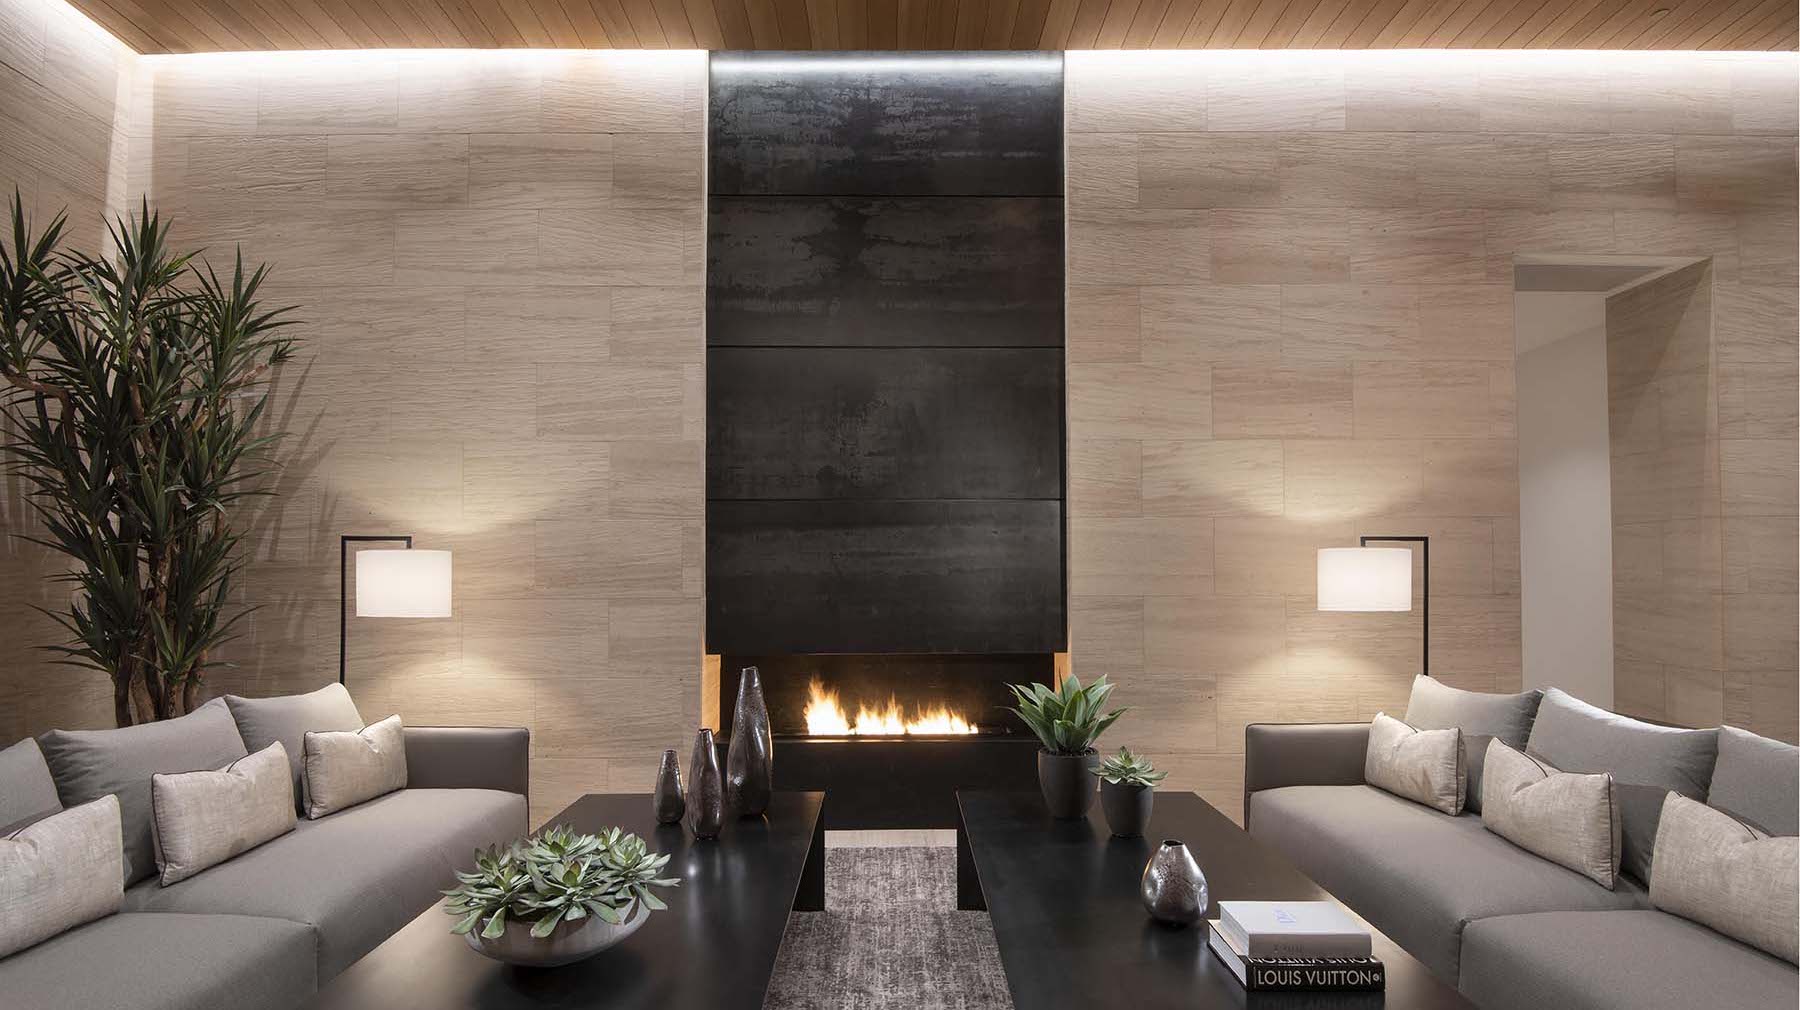 Now and Zen living roomAZ Masonry Award Located in Scottsdale Ariz Drewett Works is an award winning architecture firm specializing in luxury residential hospitality and commercial architecture